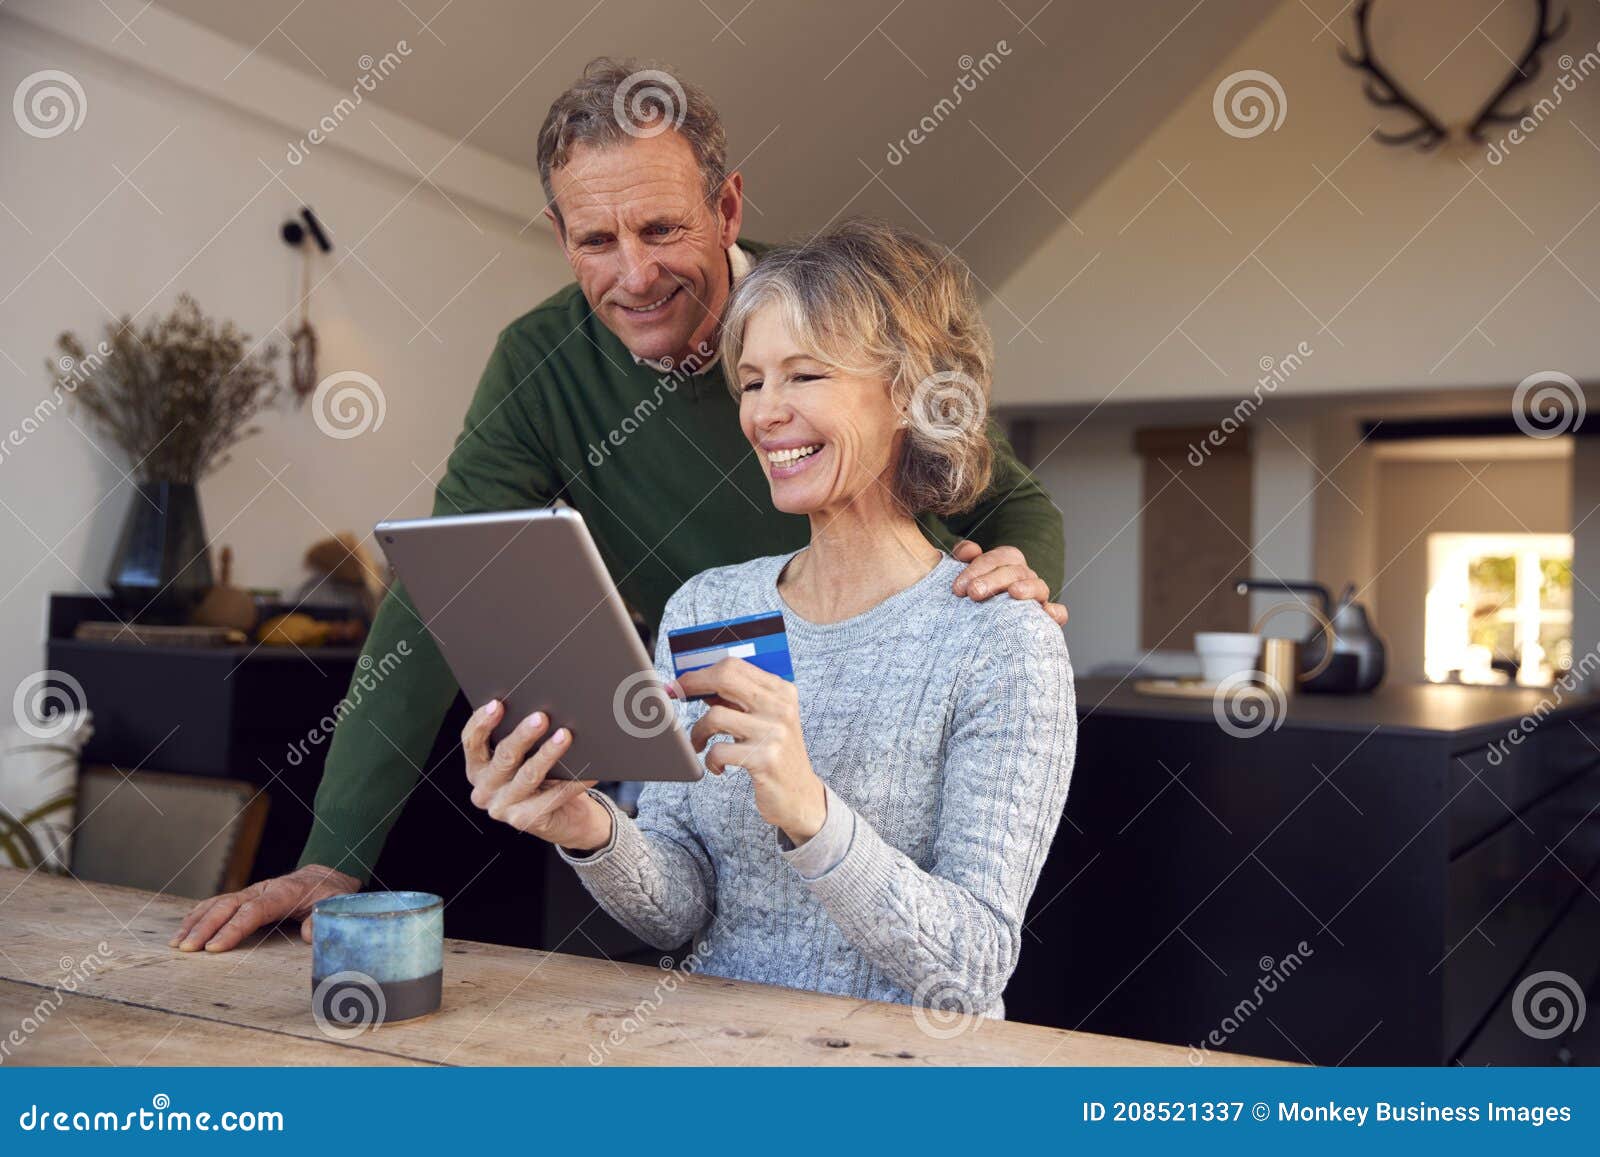 retired senior couple at home buying products or services online with digital tablet and credit card